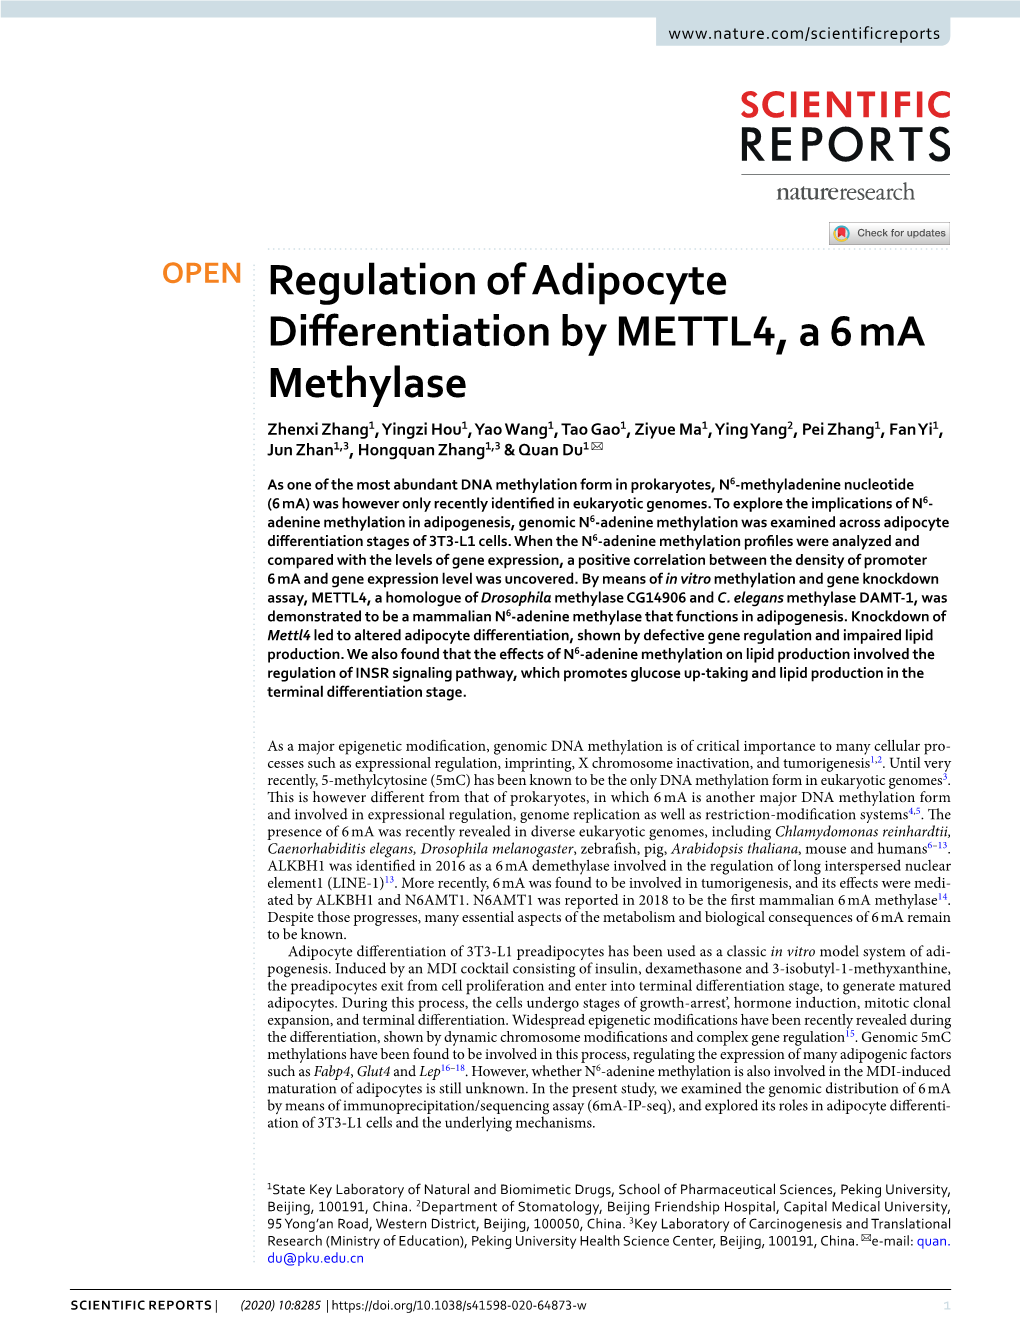 Regulation of Adipocyte Differentiation by METTL4, a 6 Ma